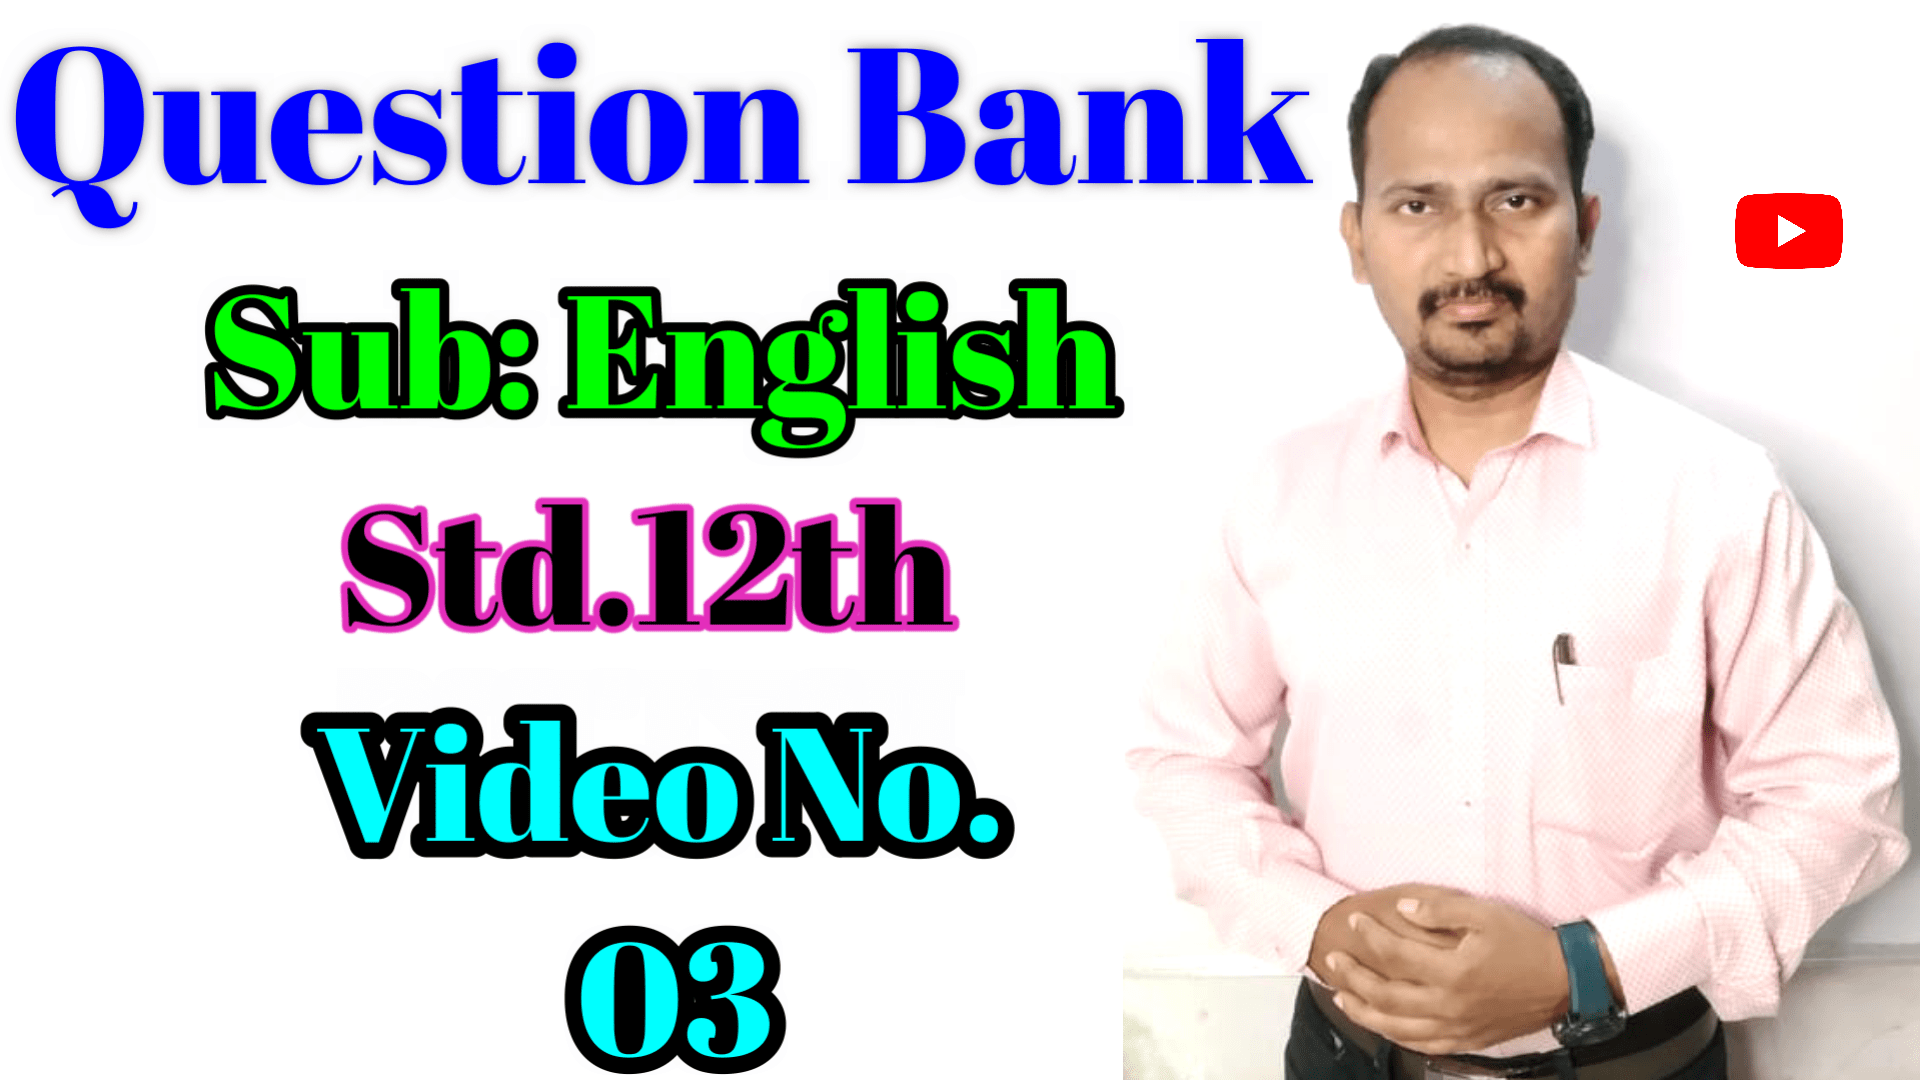 Question Bank Std.12th Video No.03